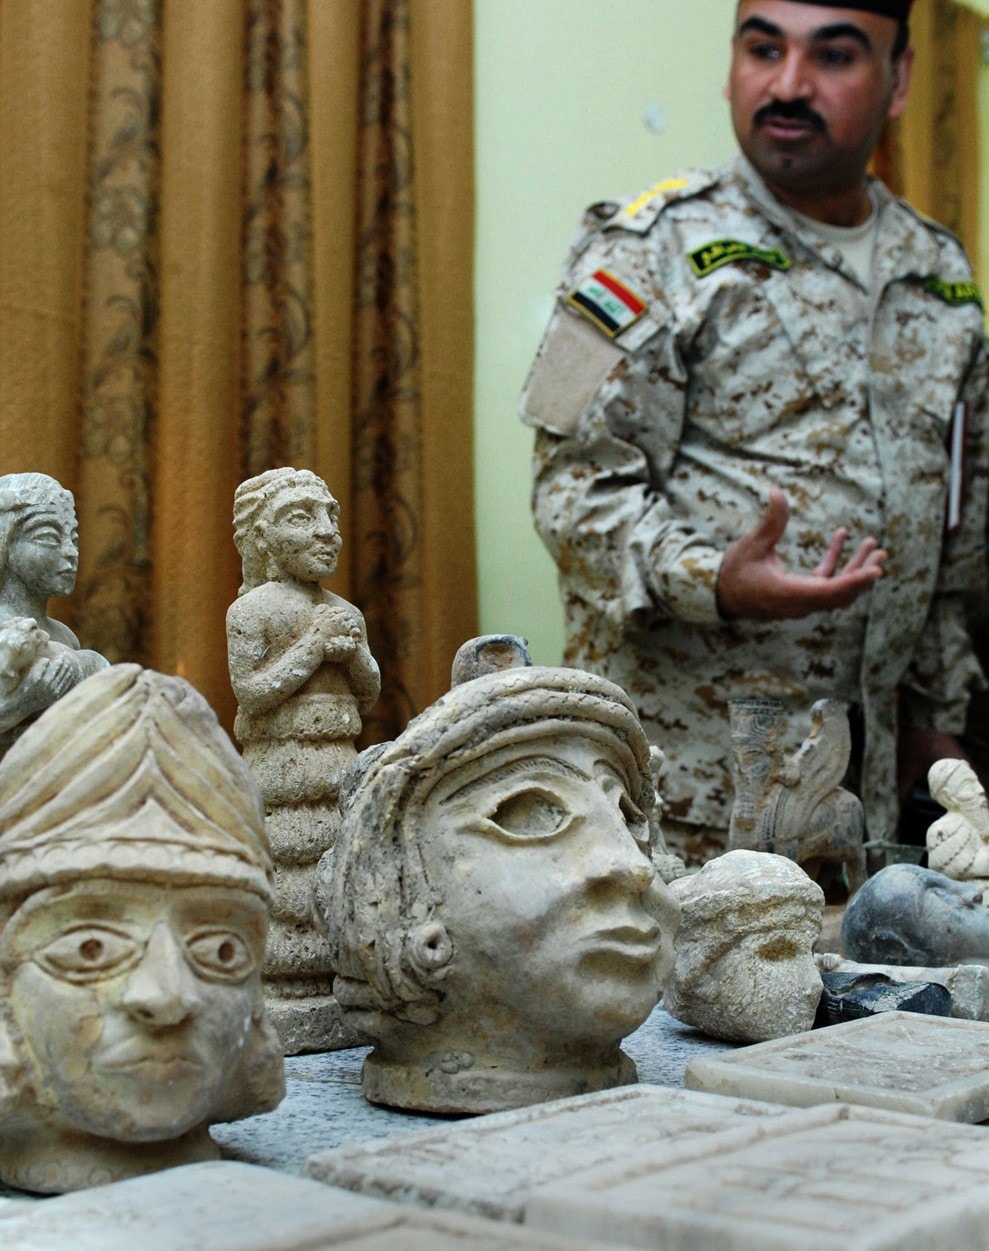 Iraqi colonel ali sabah standing next to artefacts - stone heads - retrieved after the looting